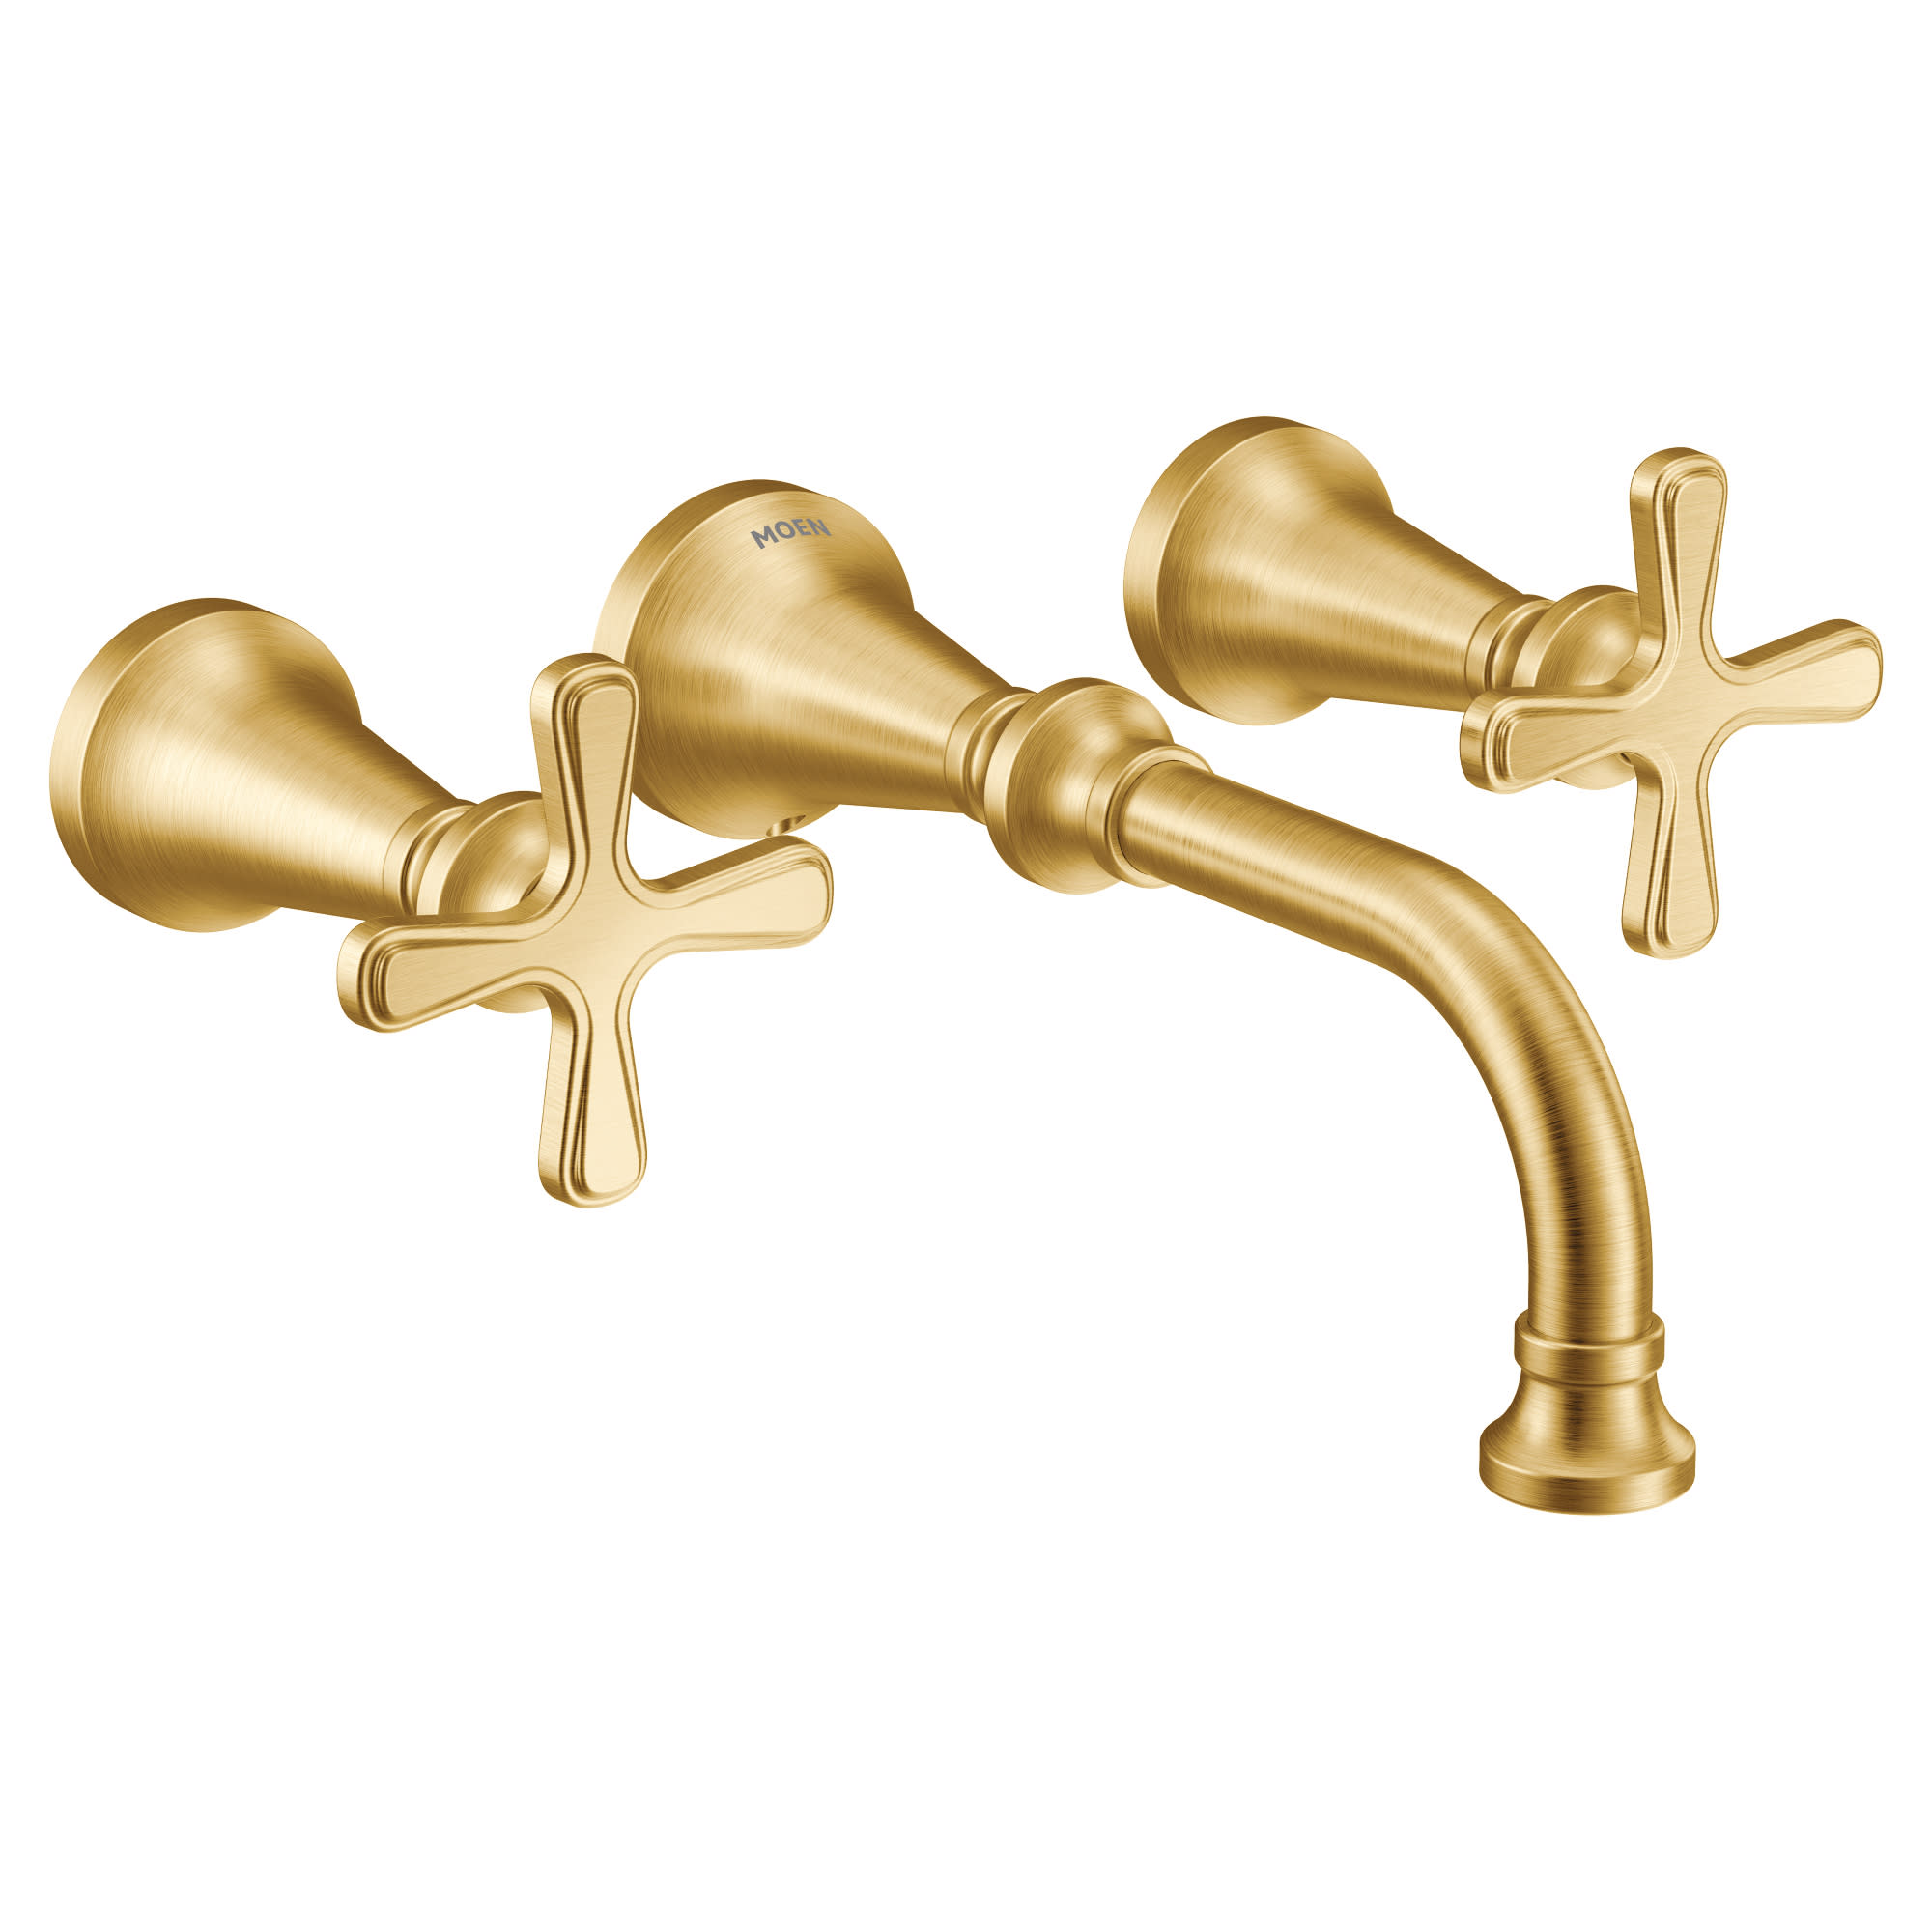 Moen Ts44105 Colinet 1.2 GPM Wall Mounted Widespread Bathroom Faucet - Gold - image 1 of 7